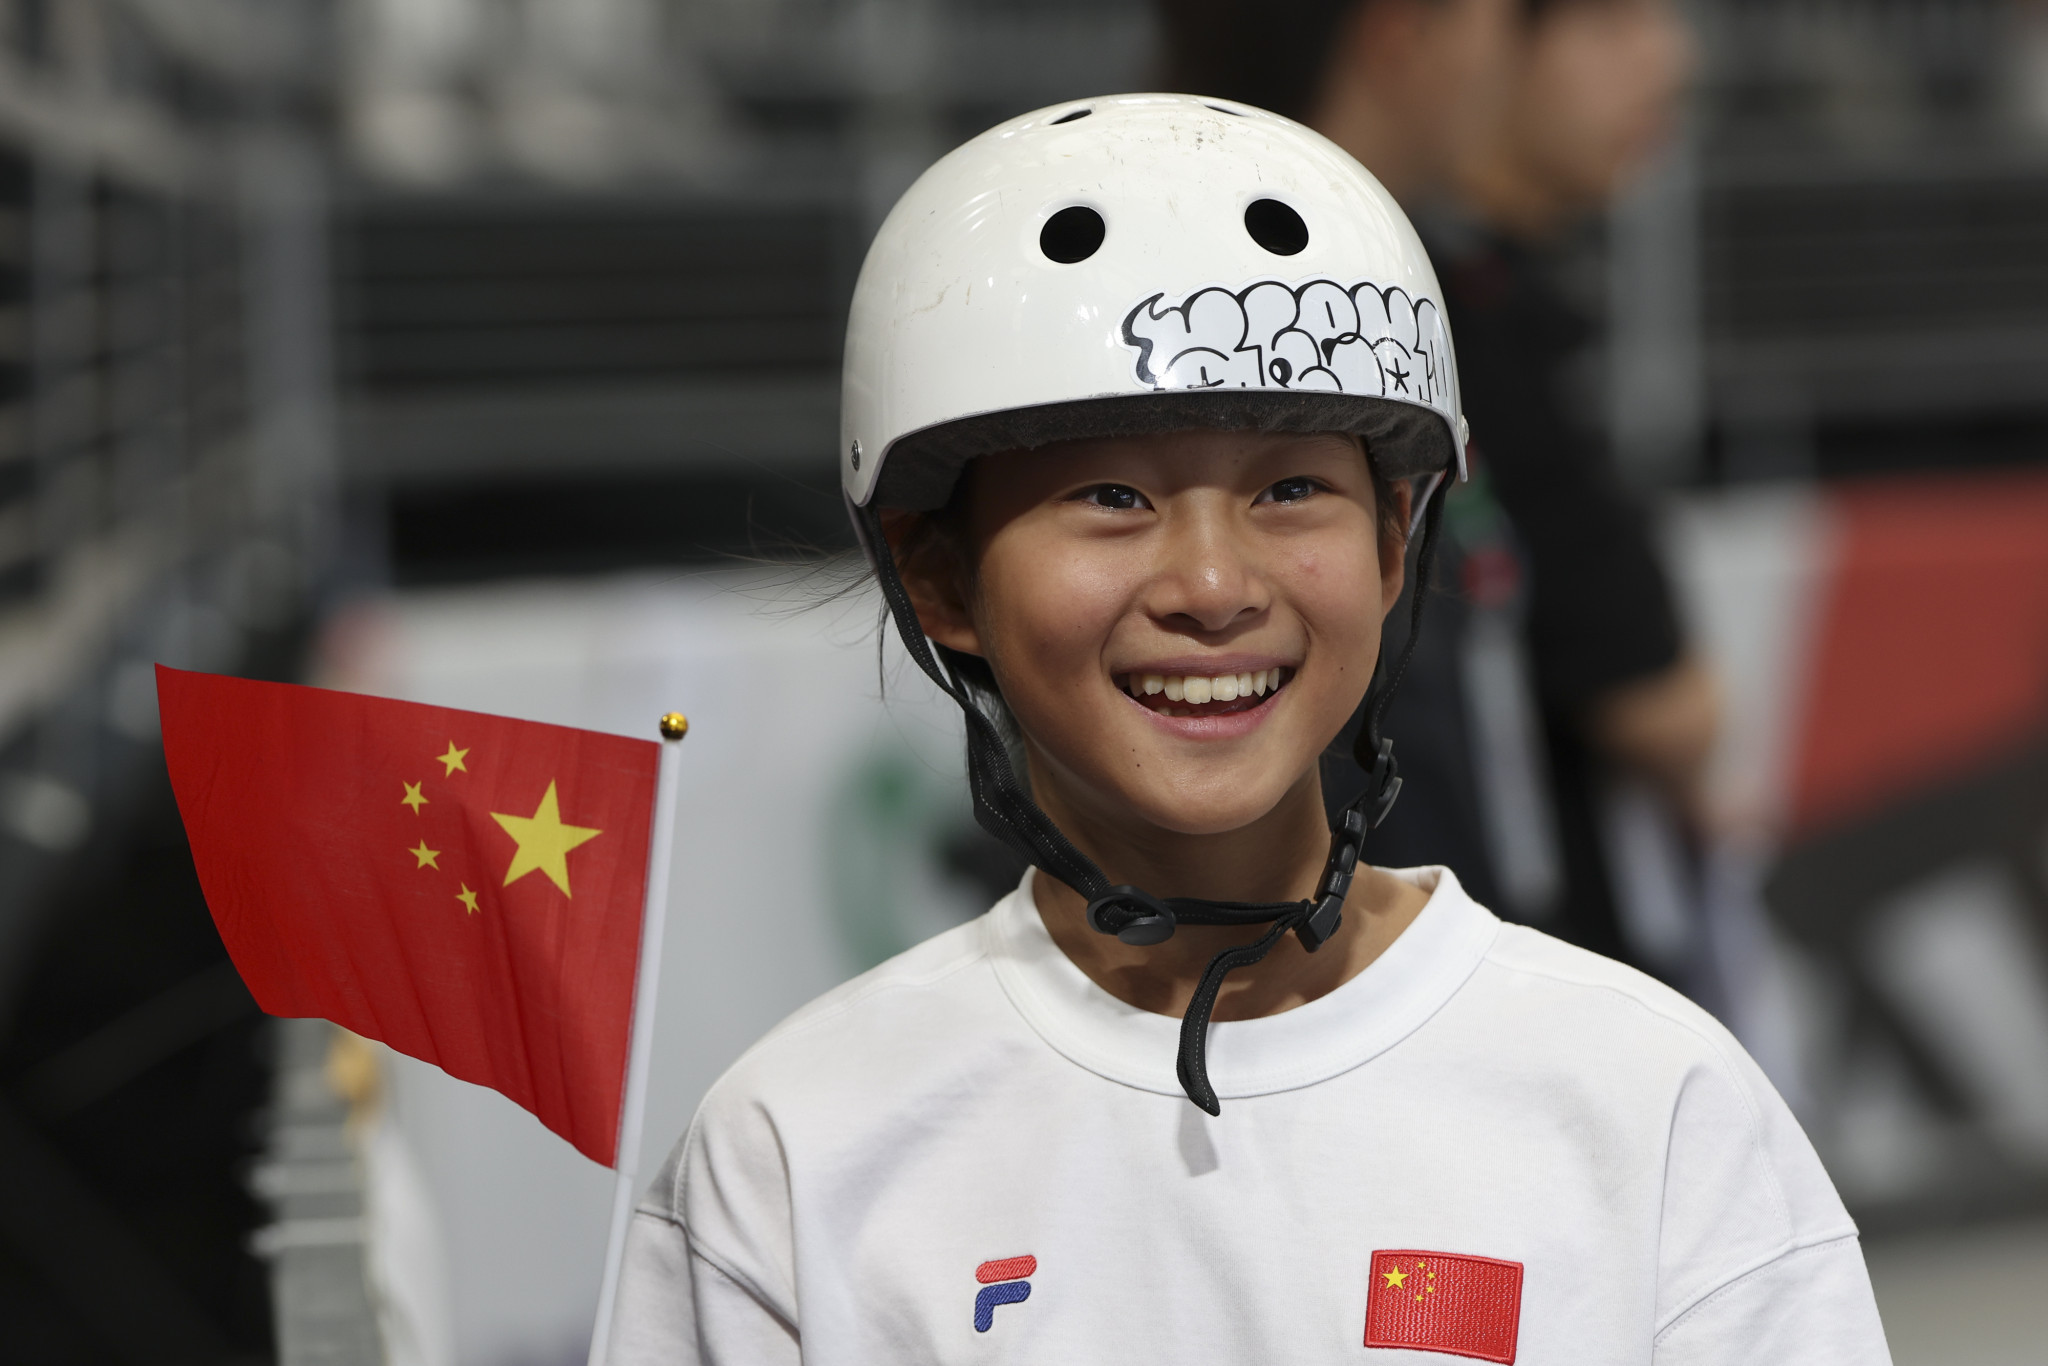 Zheng Haohao is the youngest competitor on our list at Paris 2024, turning 12 years old on the closing day. GETTY IMAGES